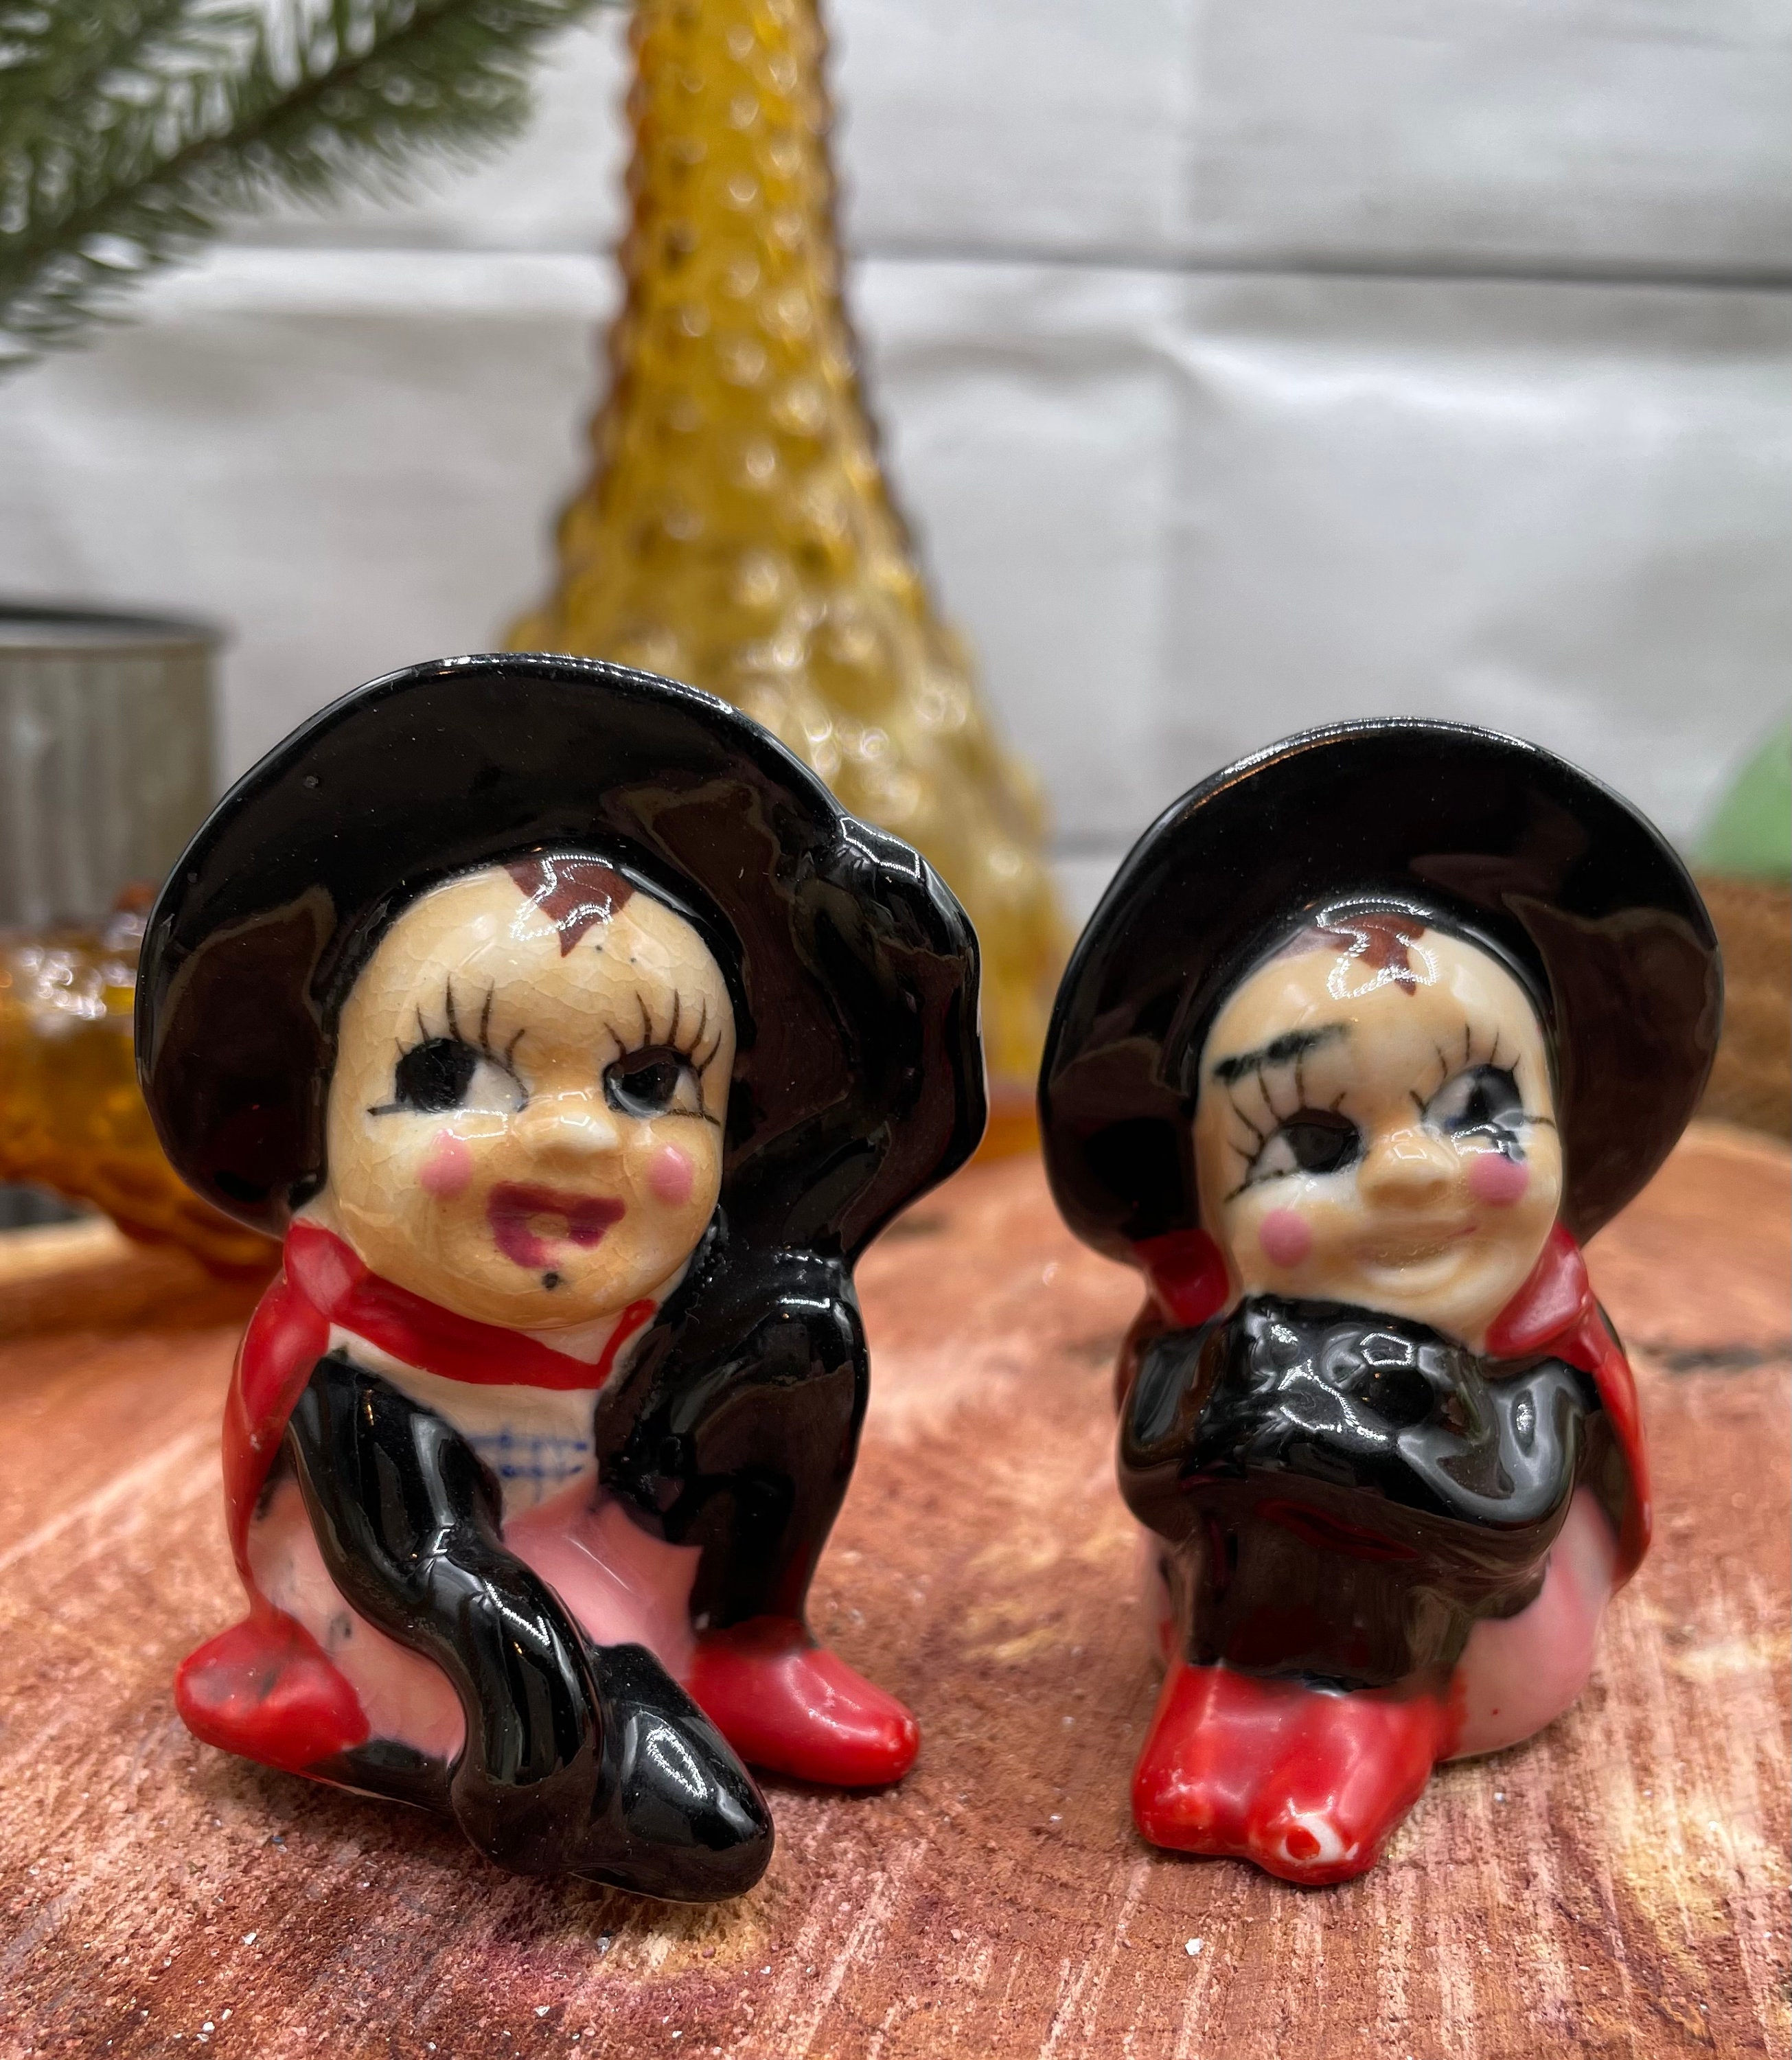 Good Witch Bad Witch Salt and Pepper Shakers Set